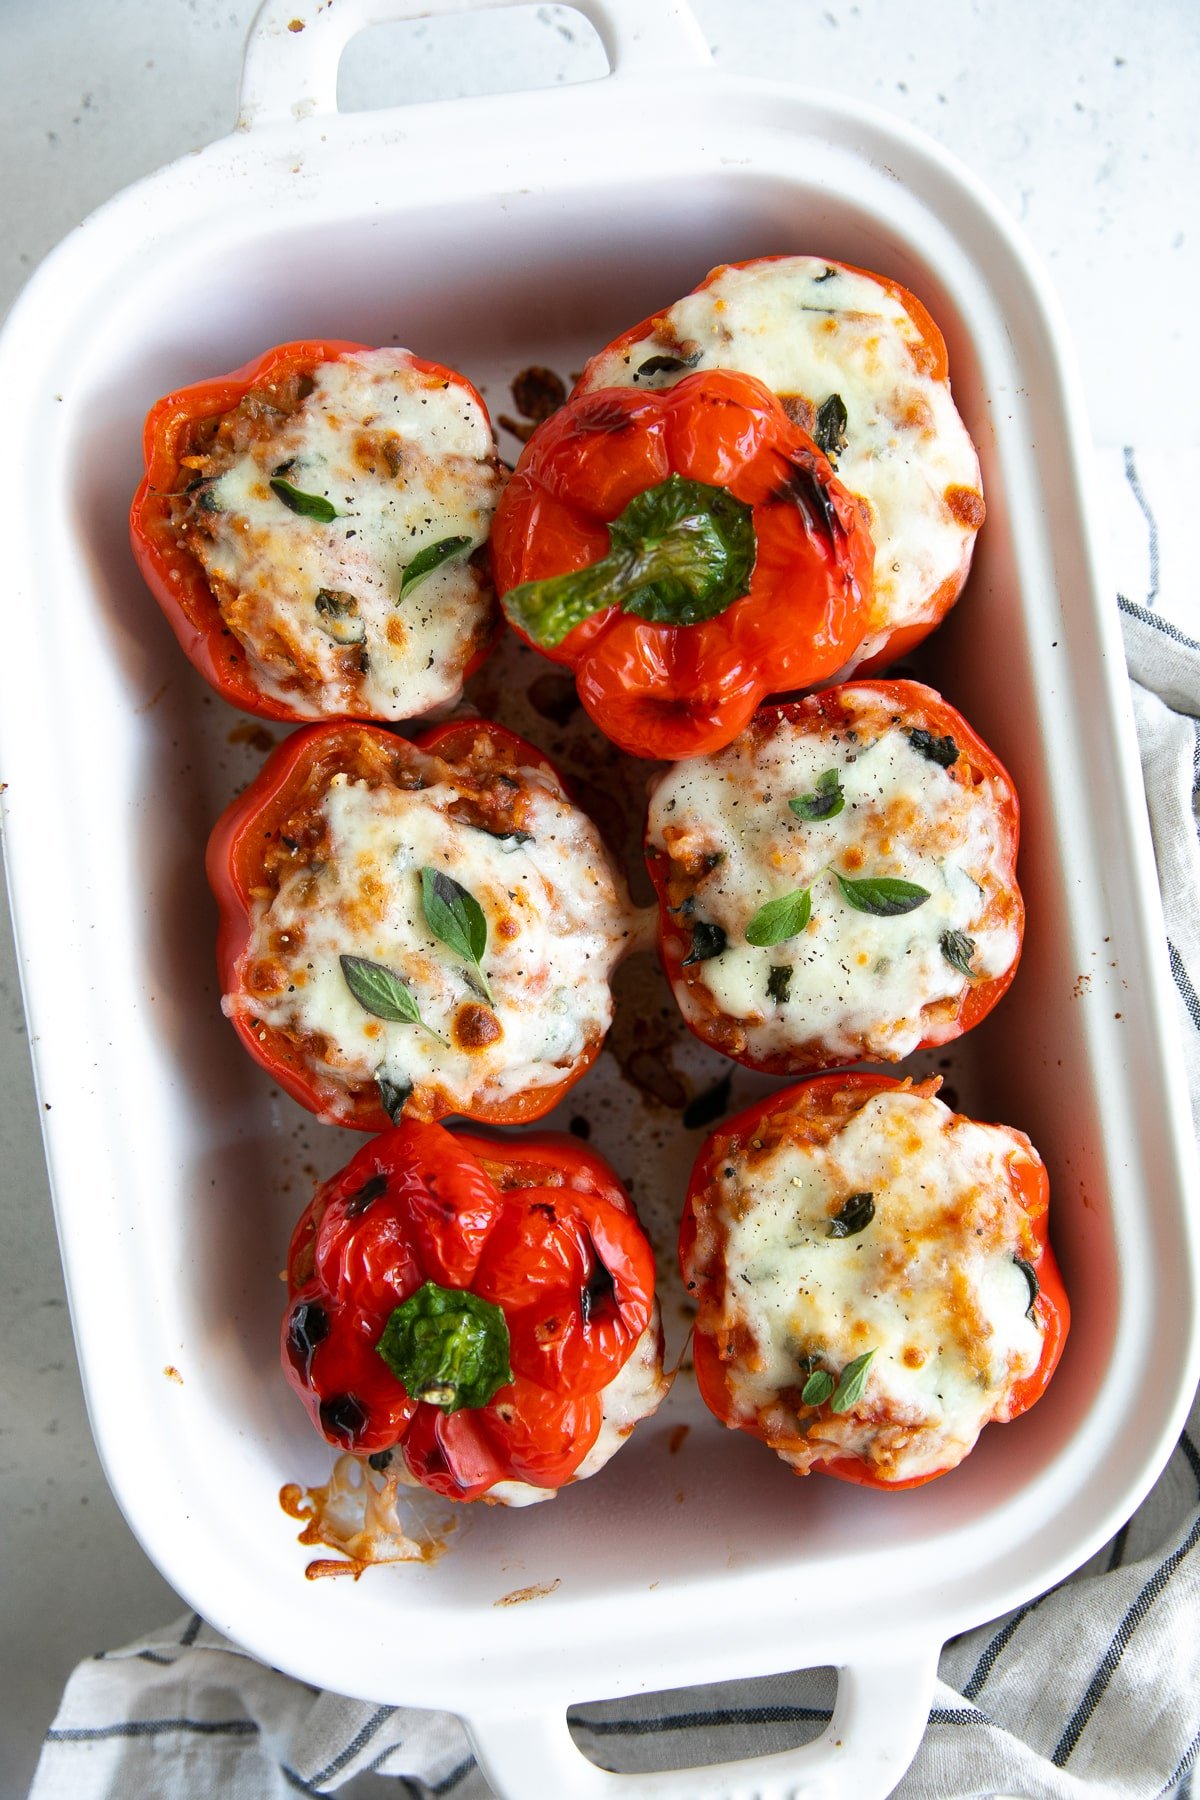 White baking dish filled with red bell peppers stuffed with rice and spaghetti sauce and baked.